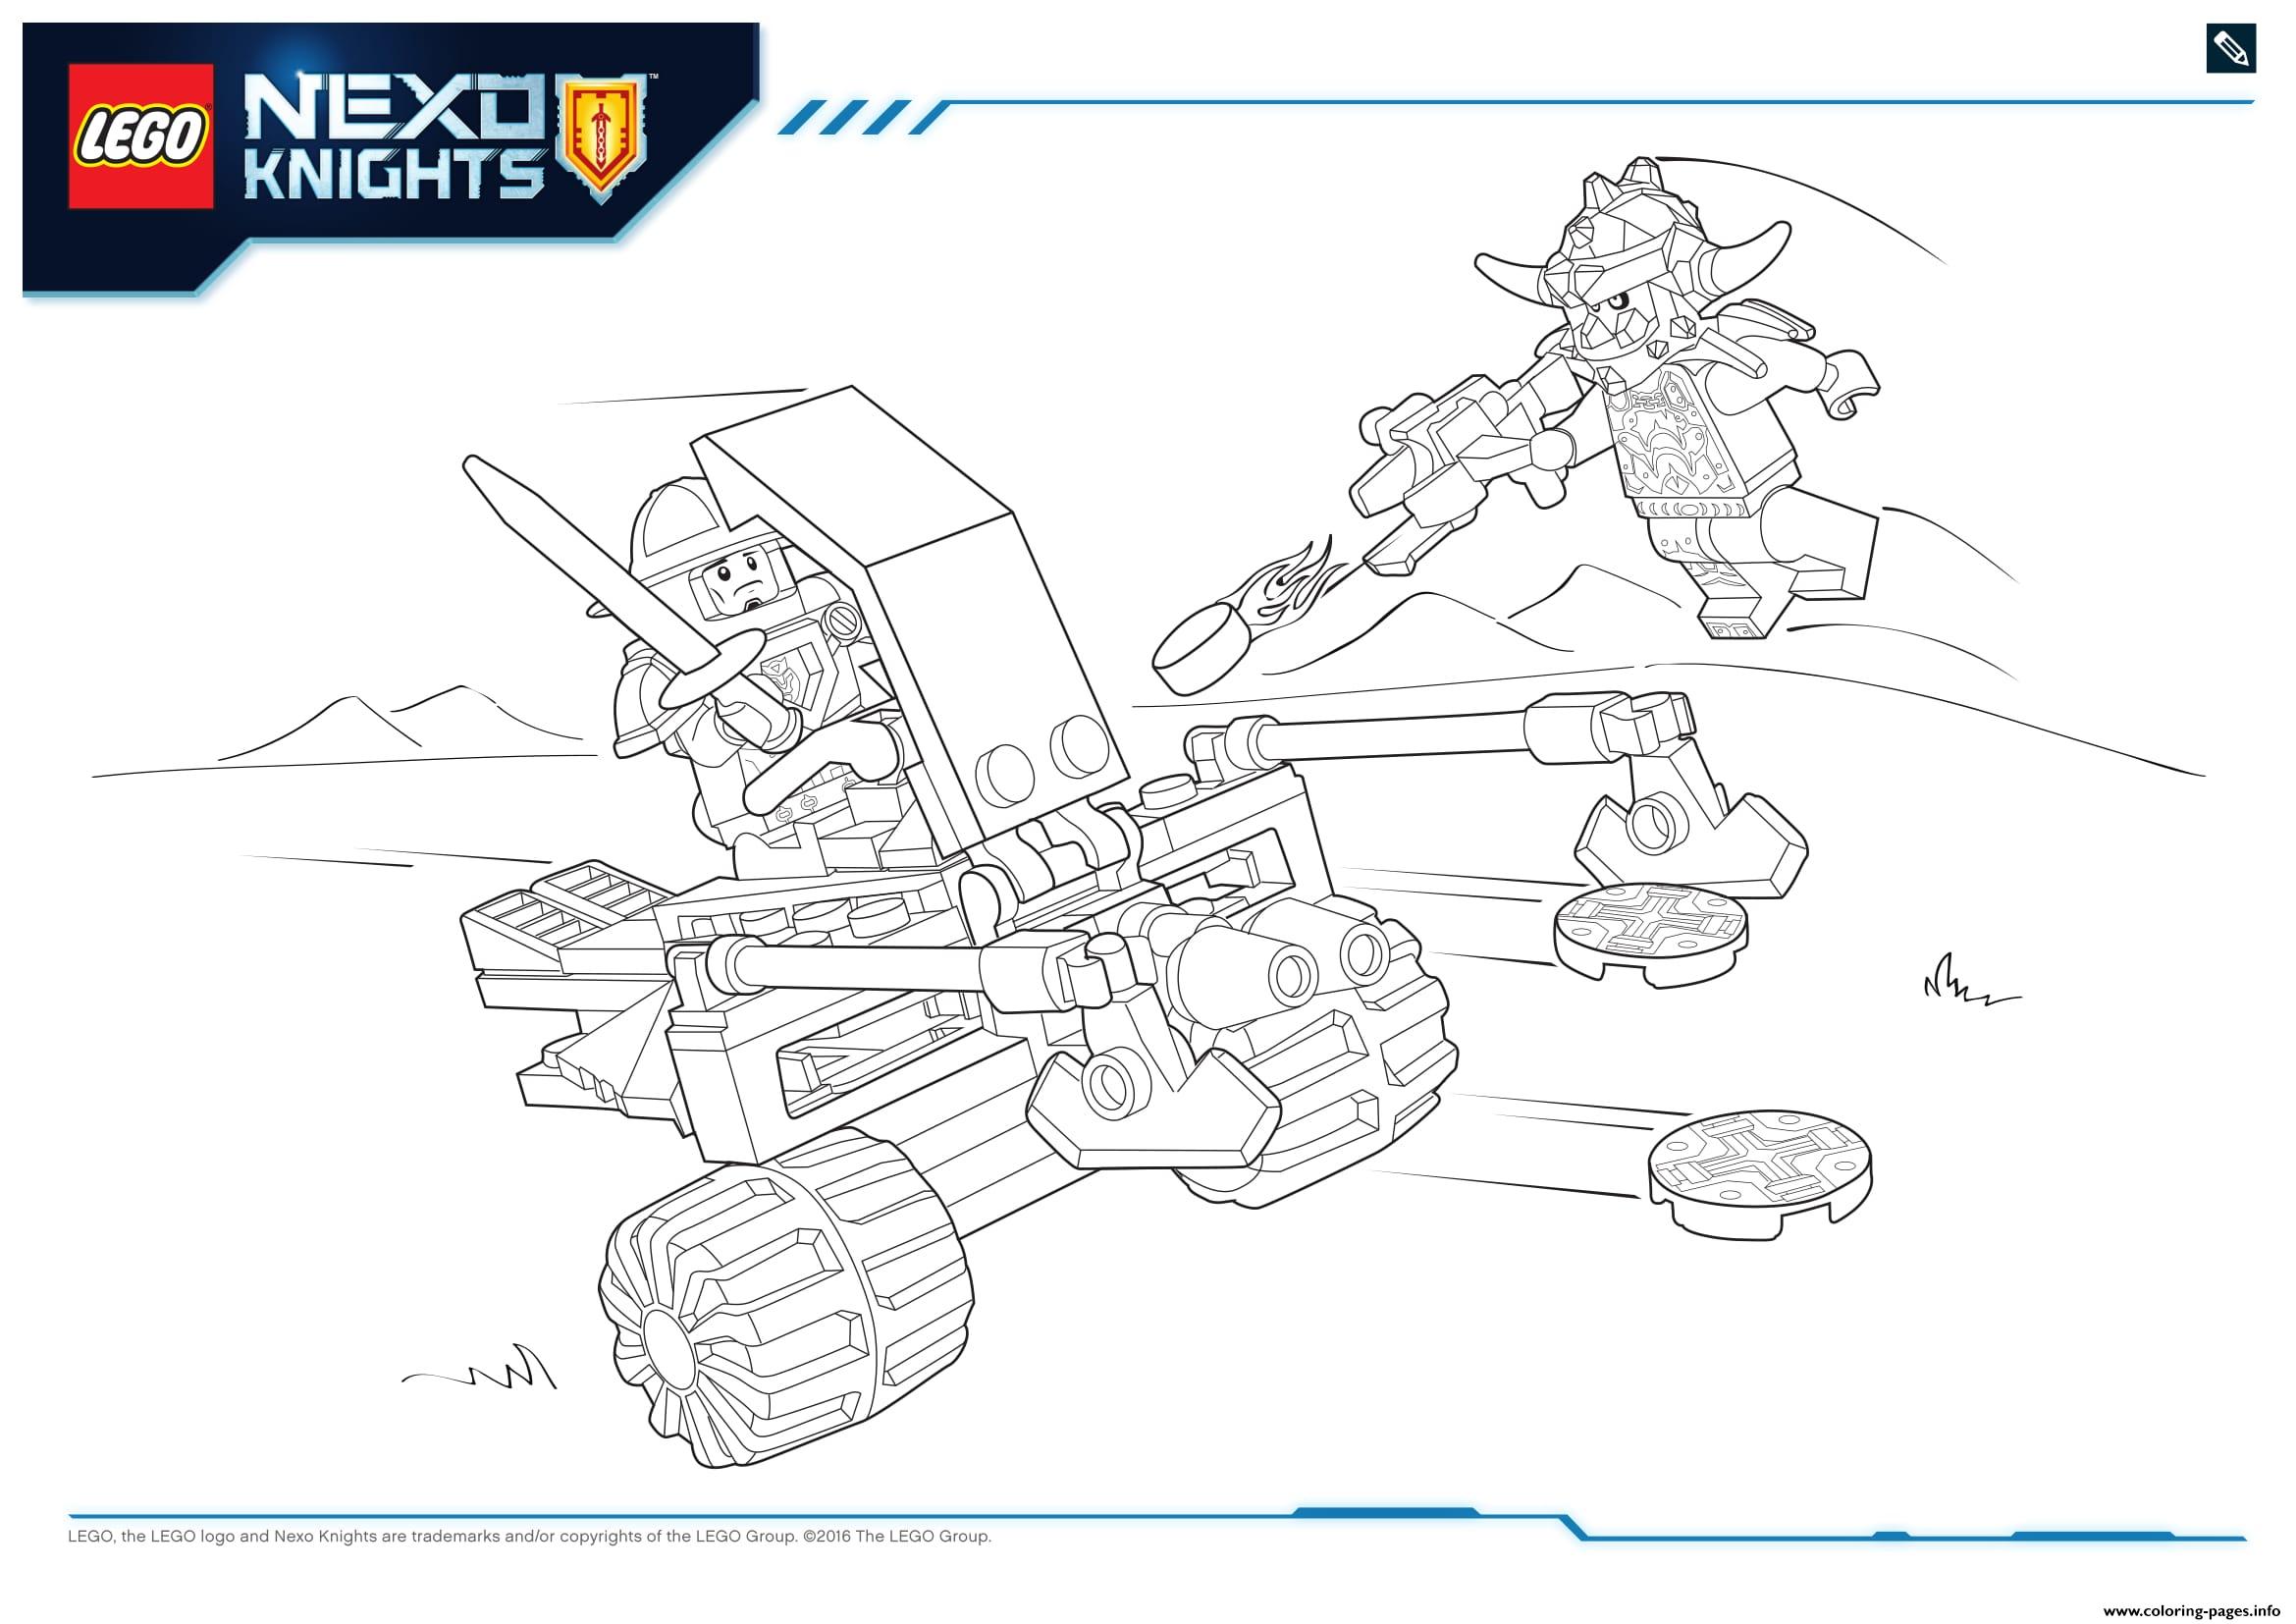 Lego NEXO KNIGHTS Products 5 coloring